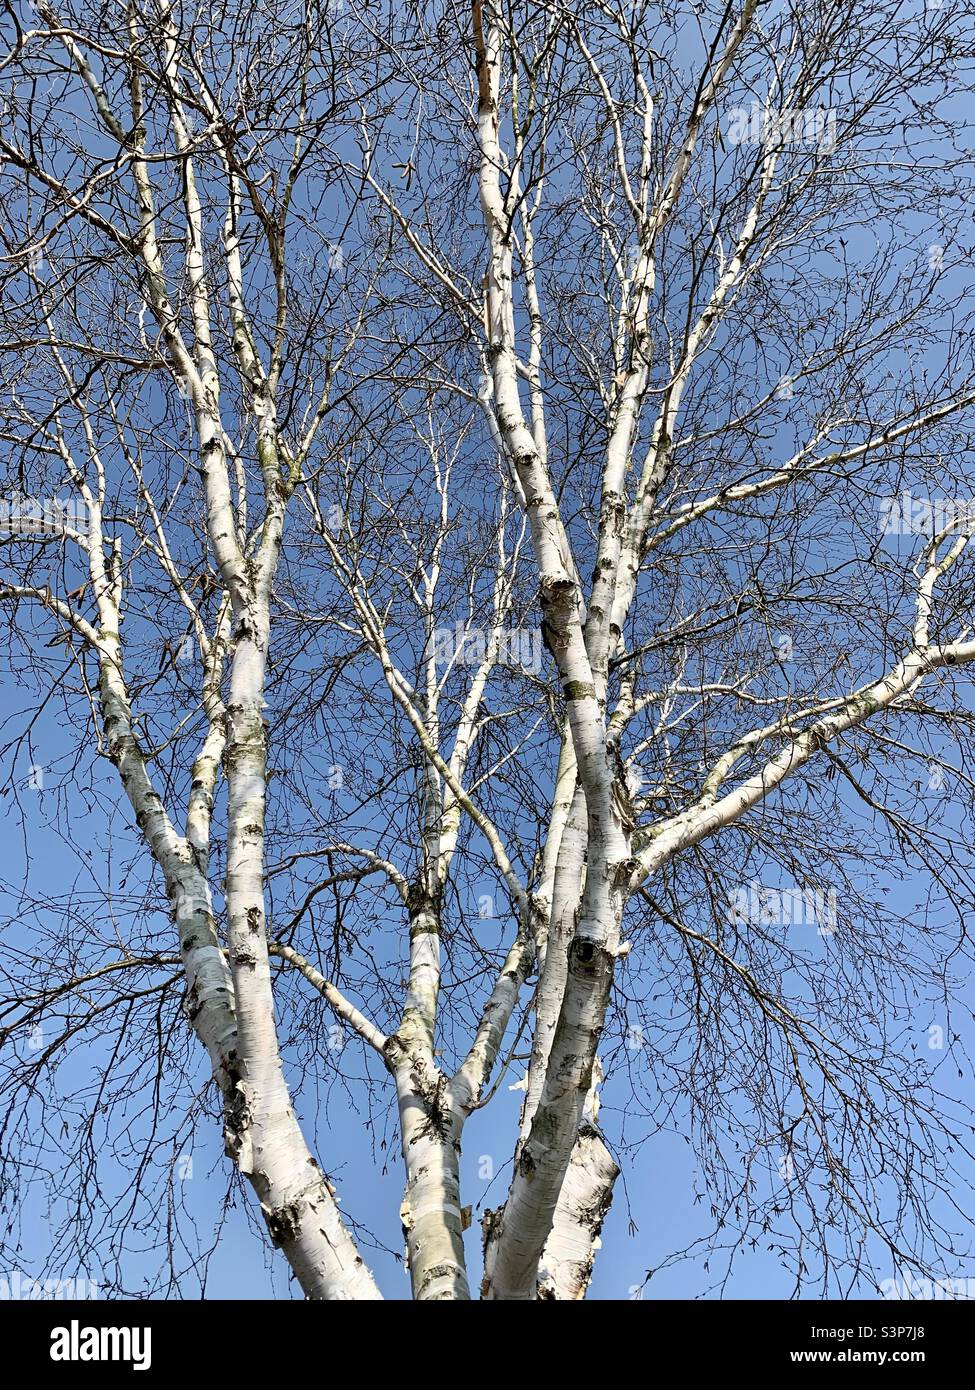 Silver birch tree with bare branches against blue sky Stock Photo